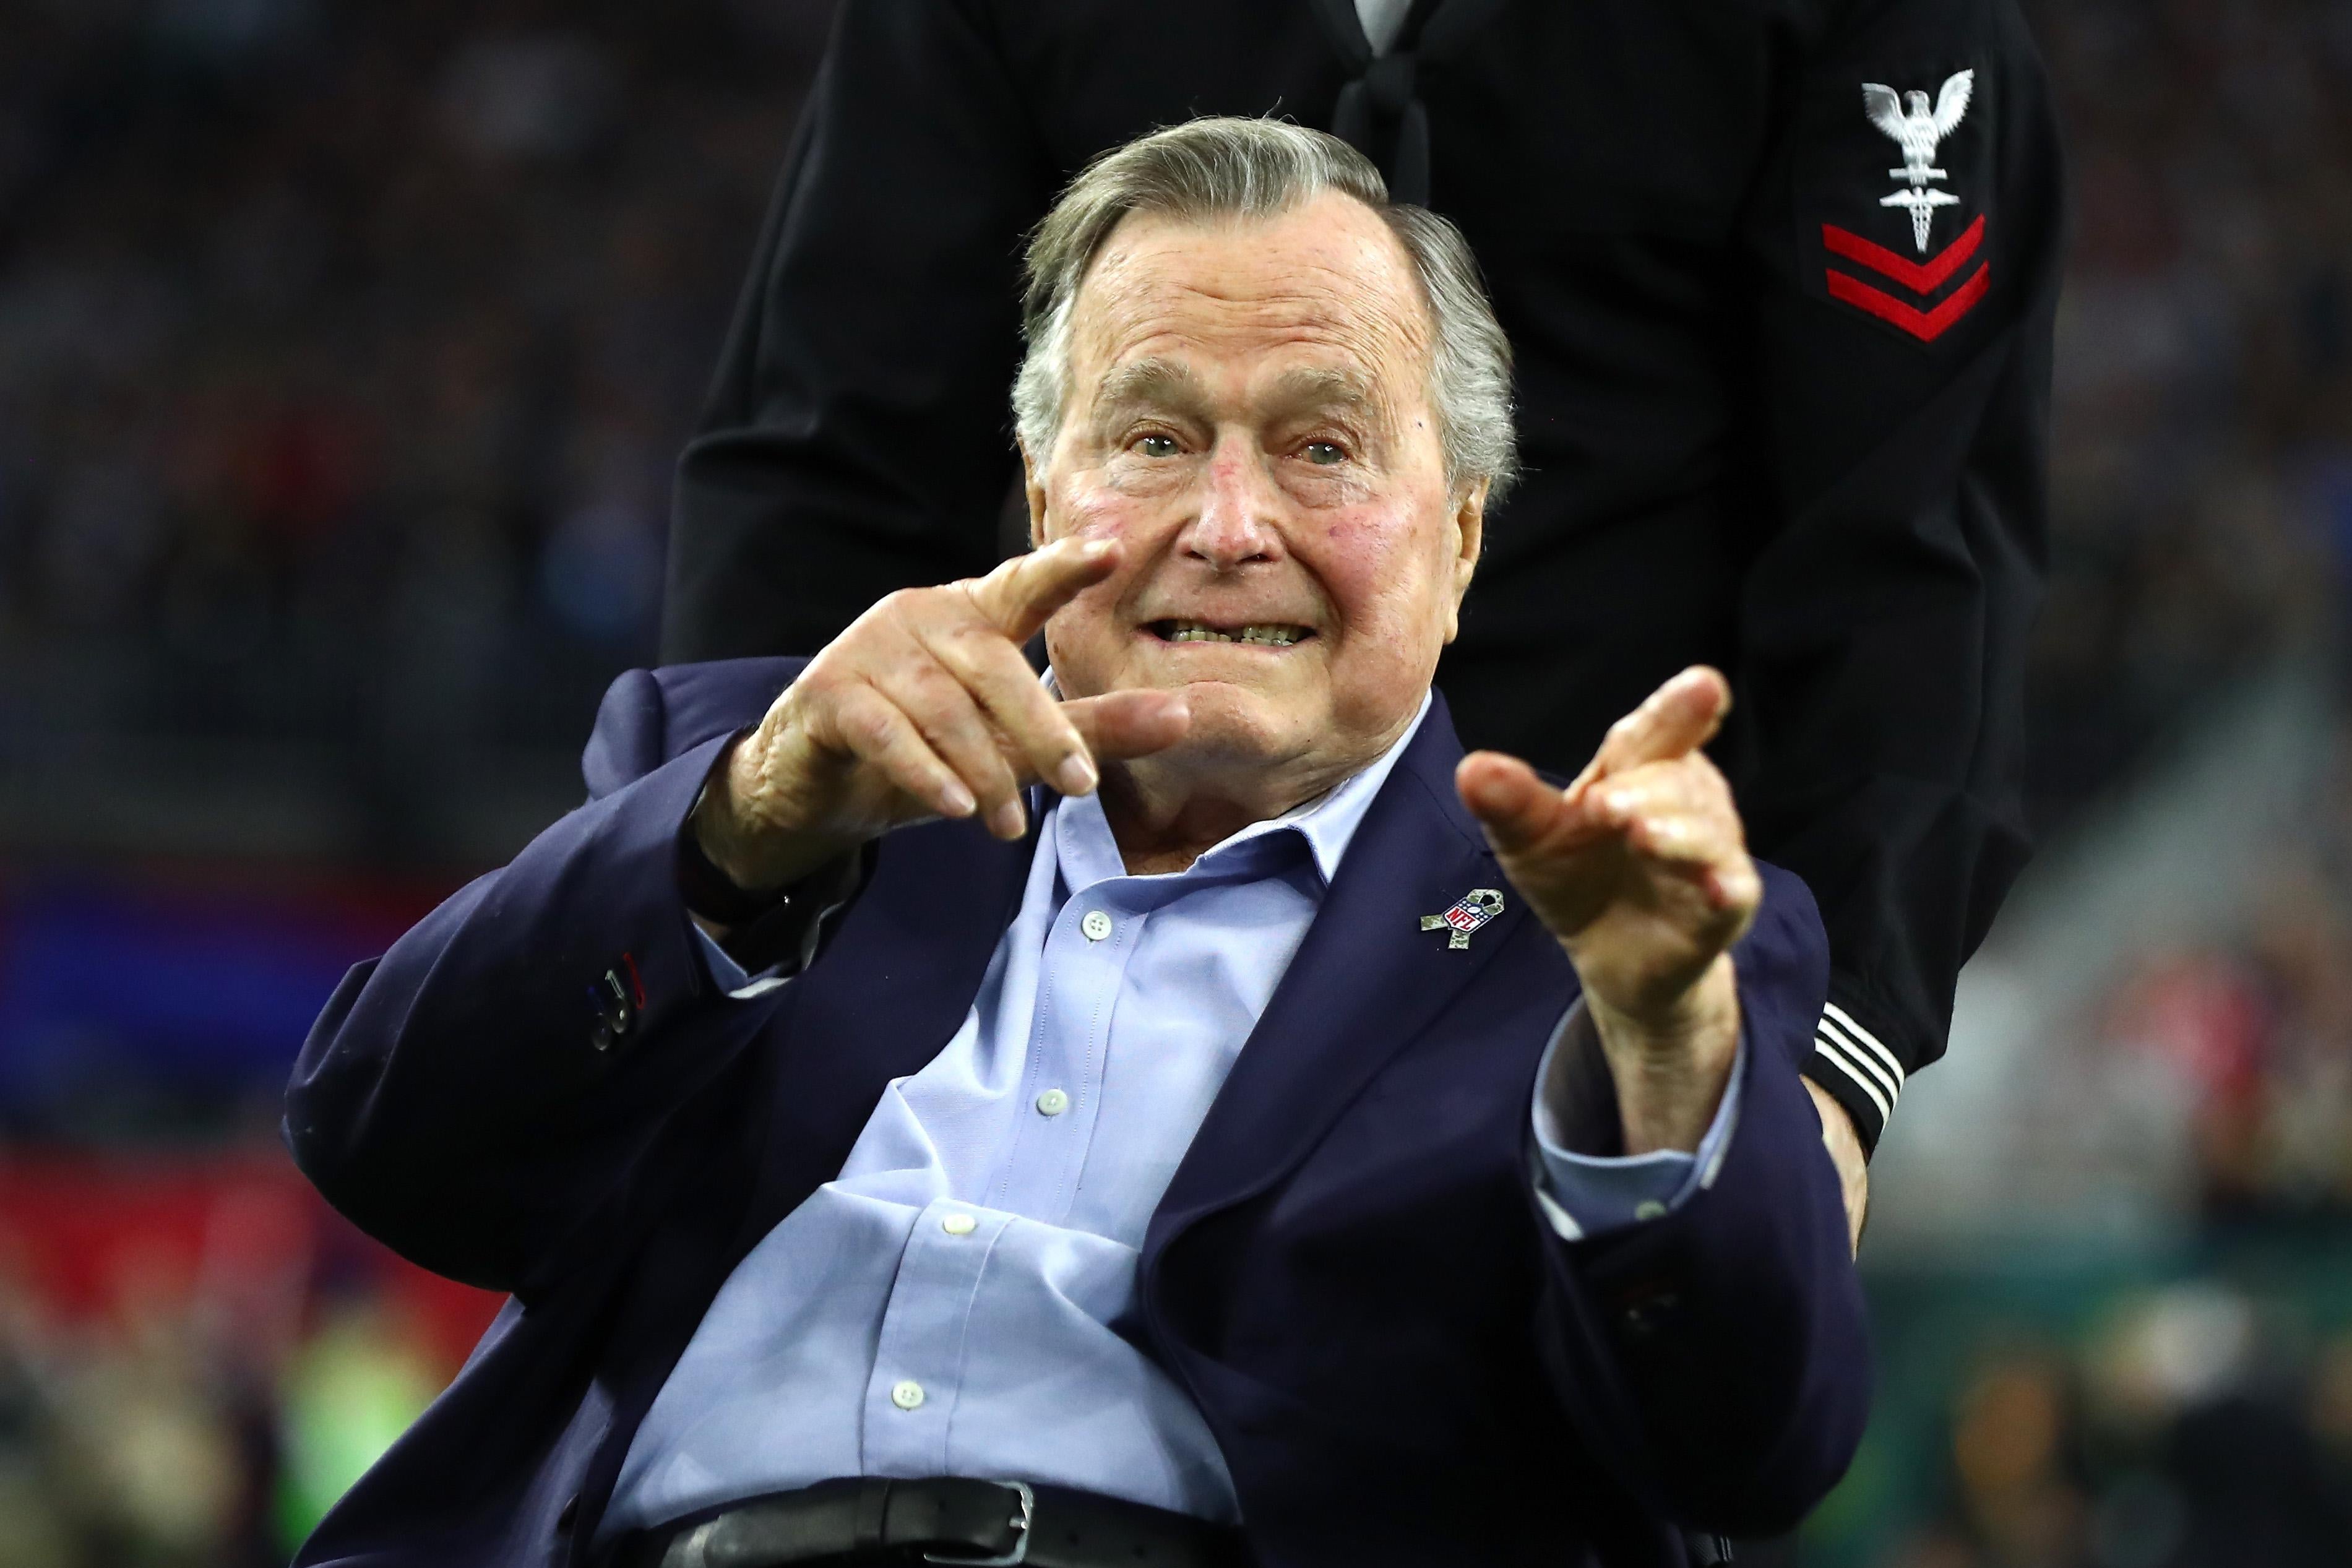 George H W Bush points to the crowd. Someone wearing a military uniform wheels his chair behind him. 